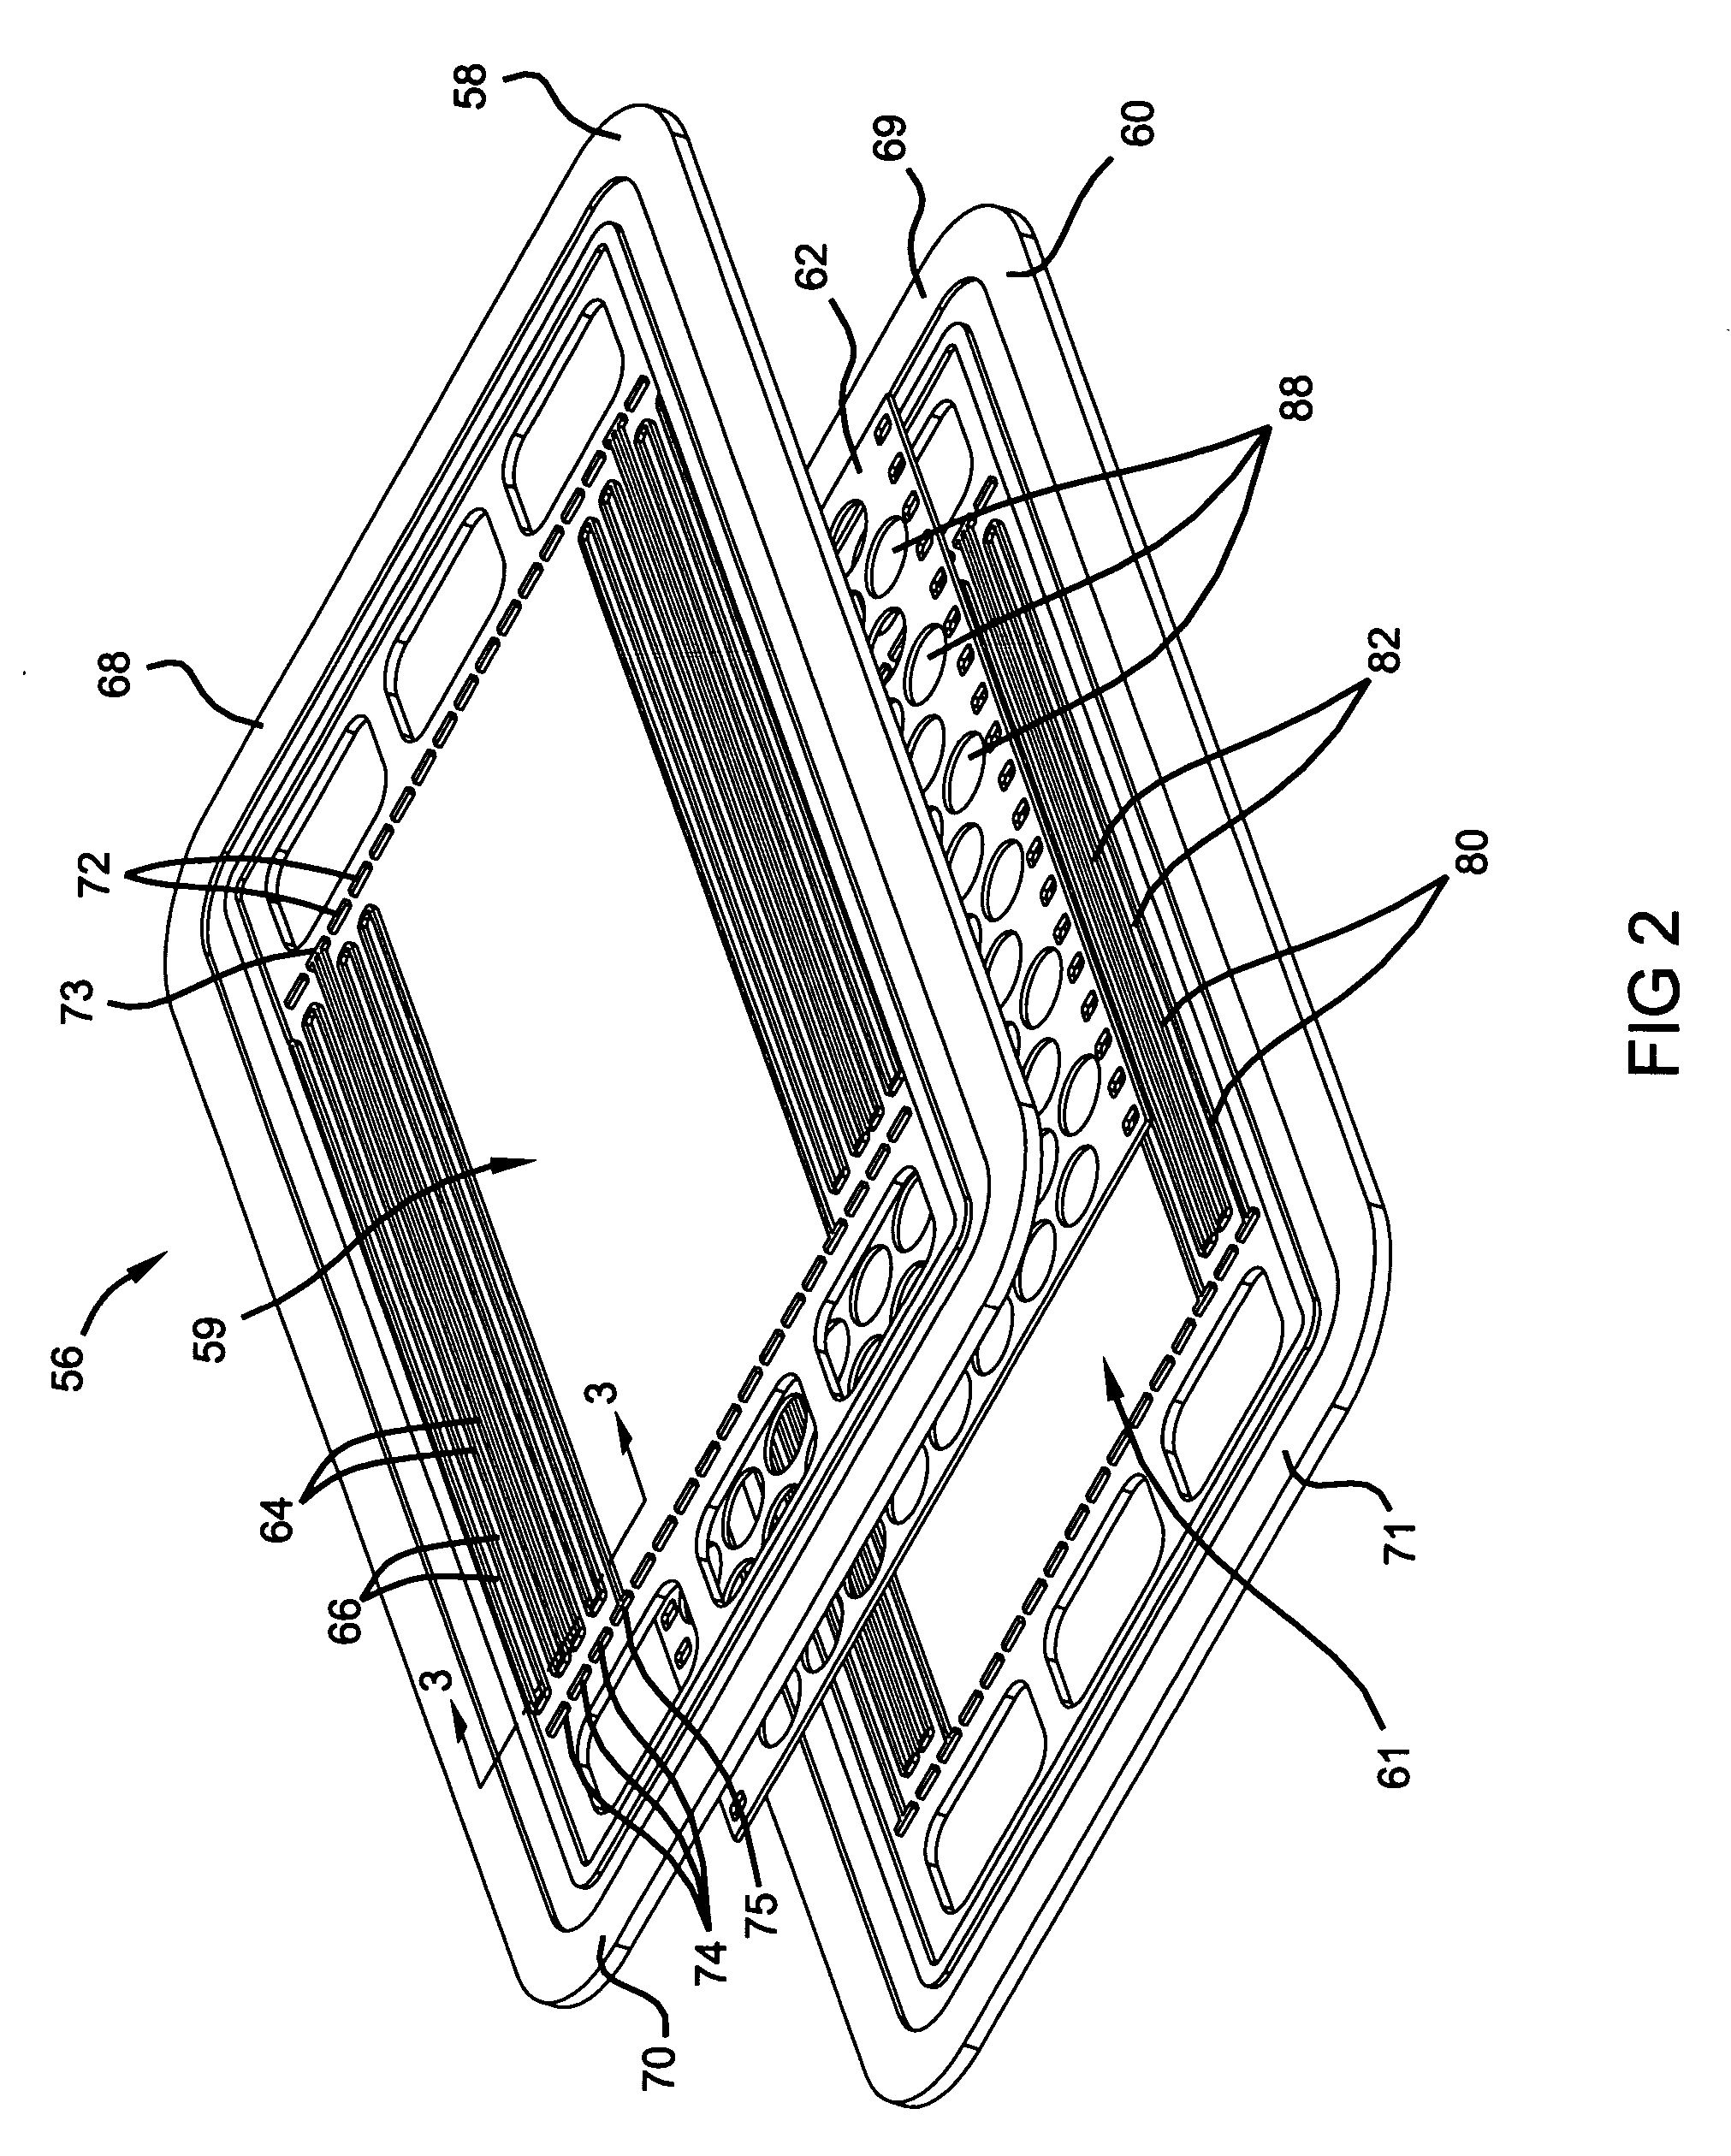 Electroconductive polymer coating on electroconductive elements in a fuel cell